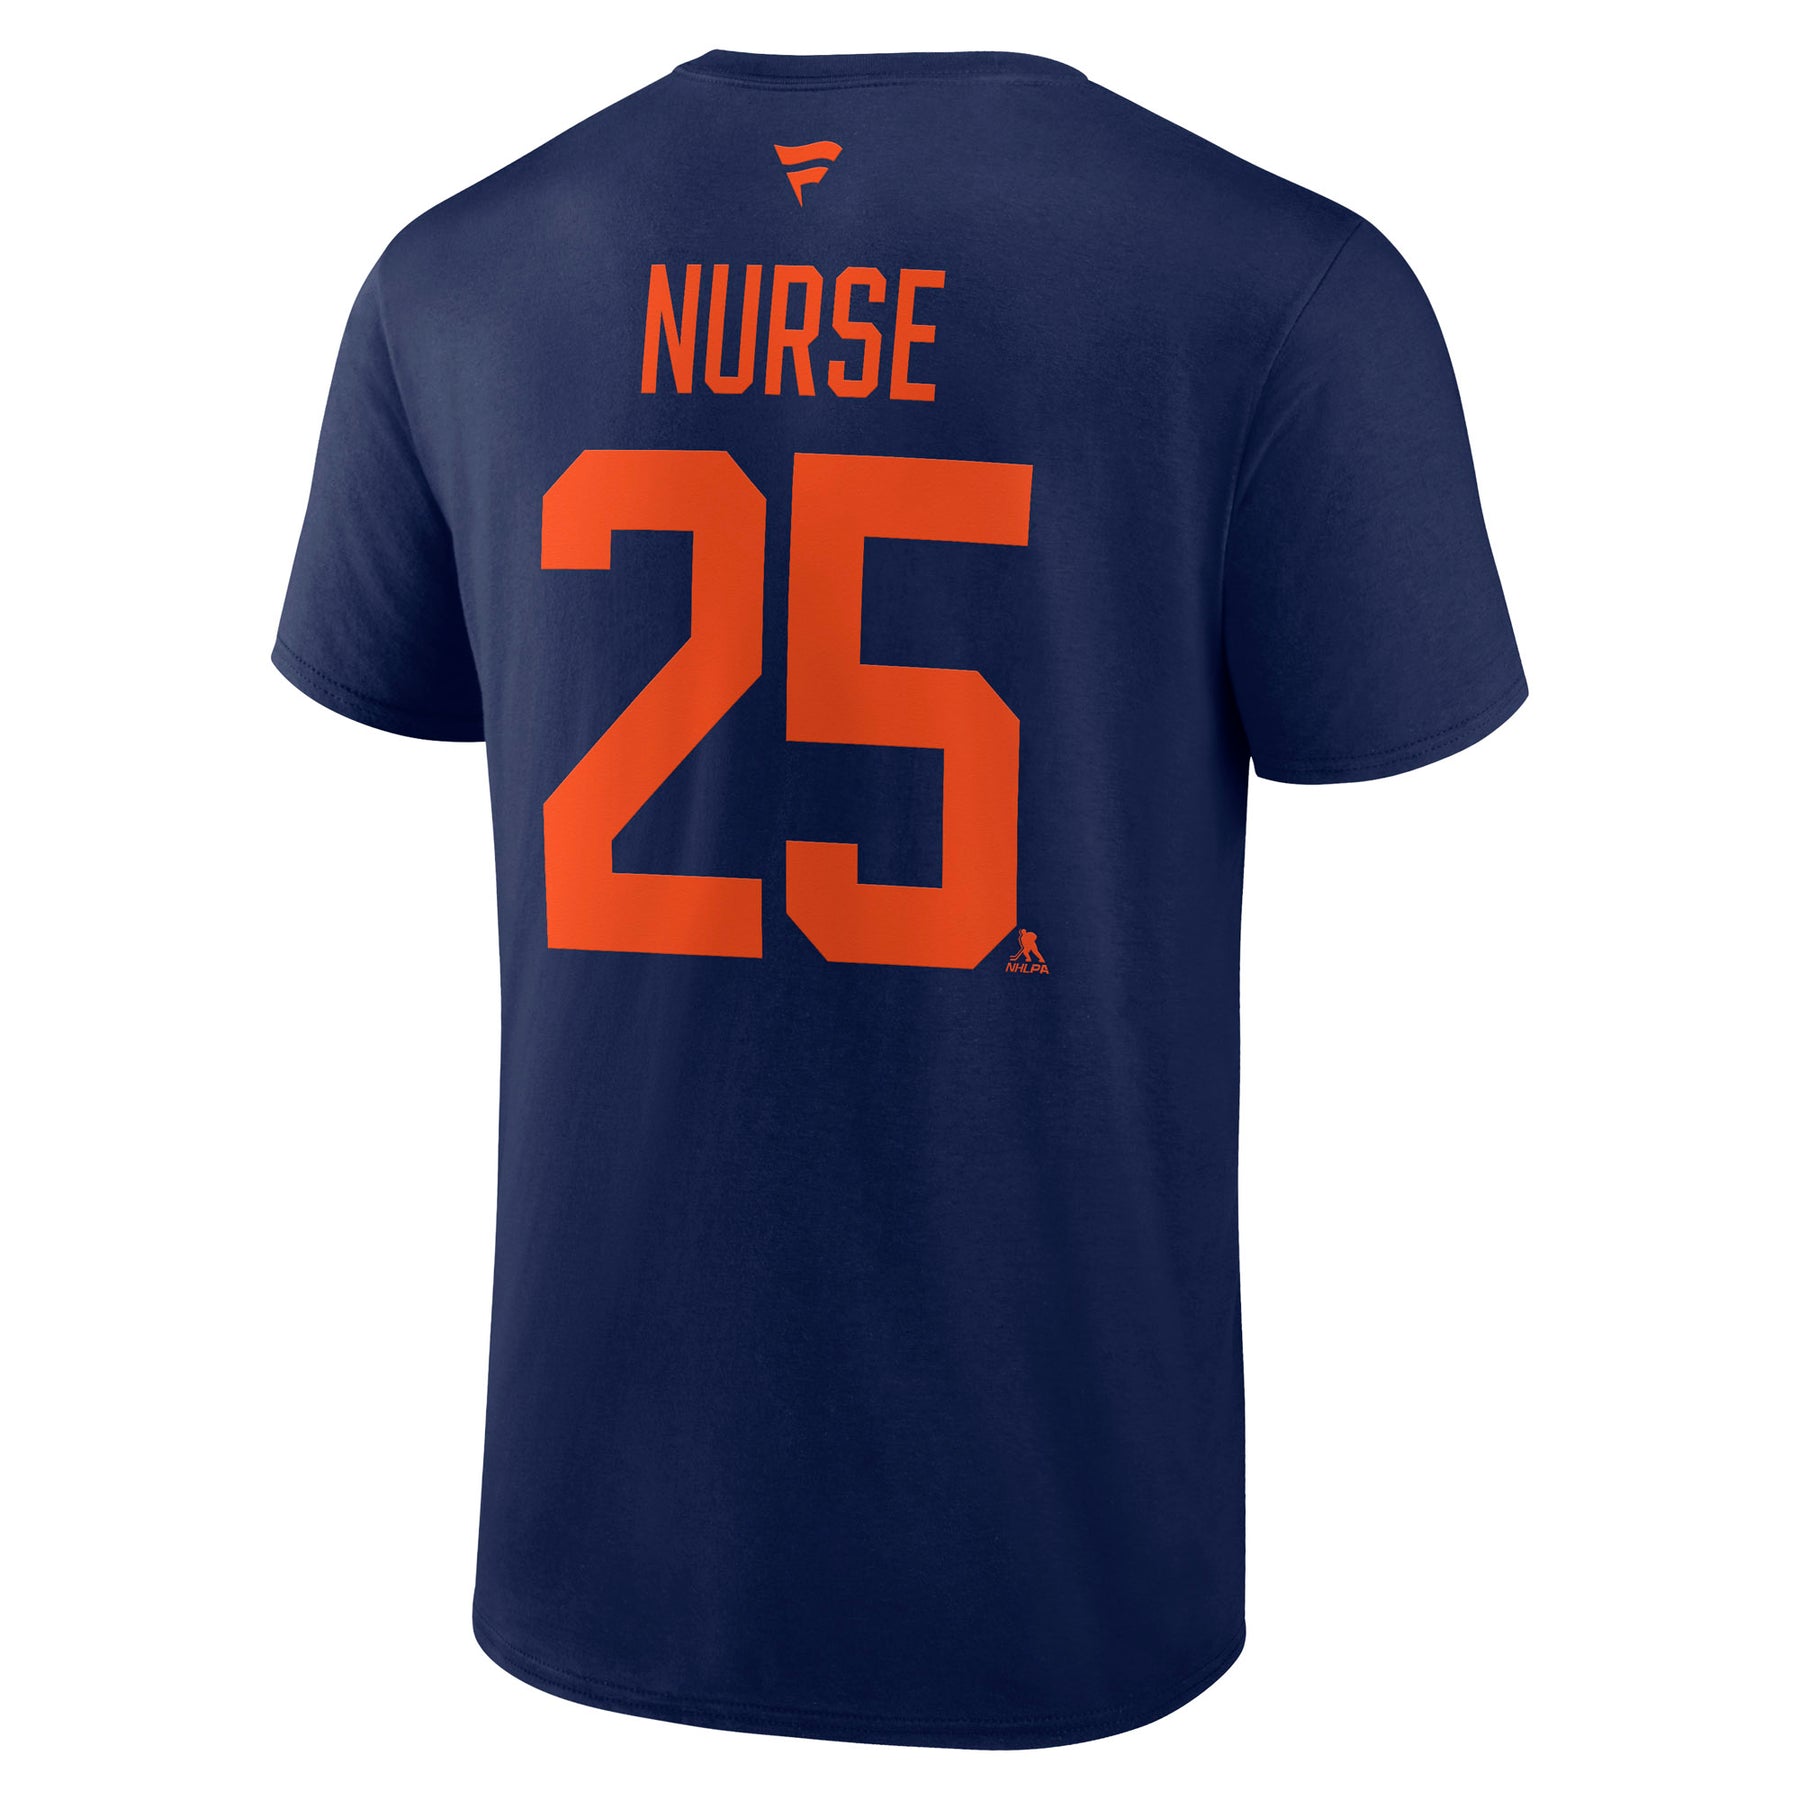 Youth NHL Edmonton Oilers Darnell Nurse Name & Number Navy - T-Shirt -  Sports Closet